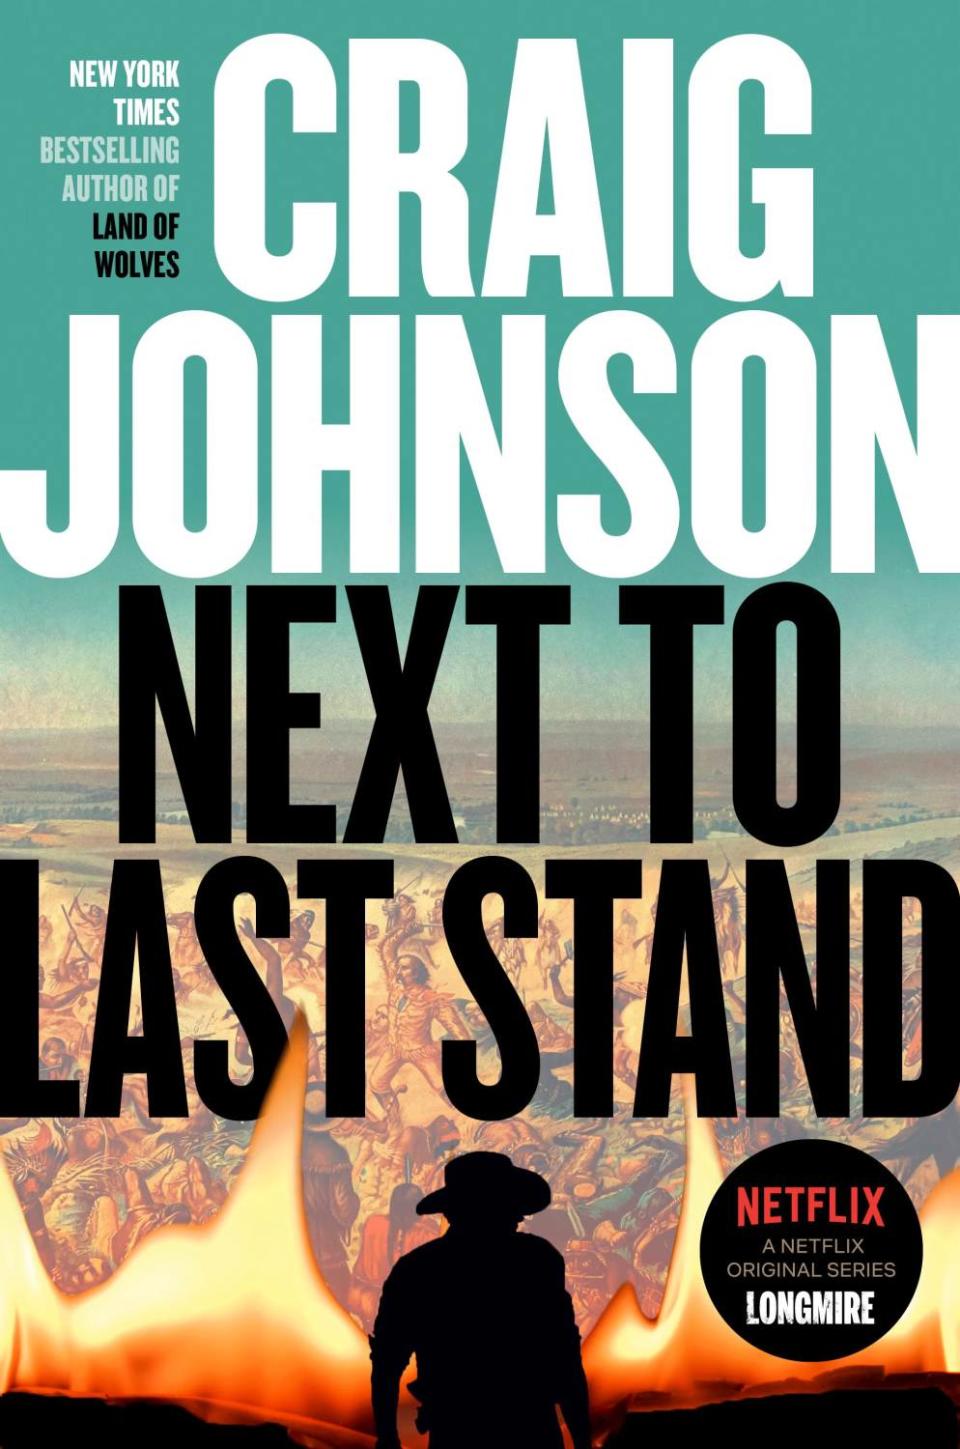 Book jacket for "Next to Last Stand" by Craig Johnson.